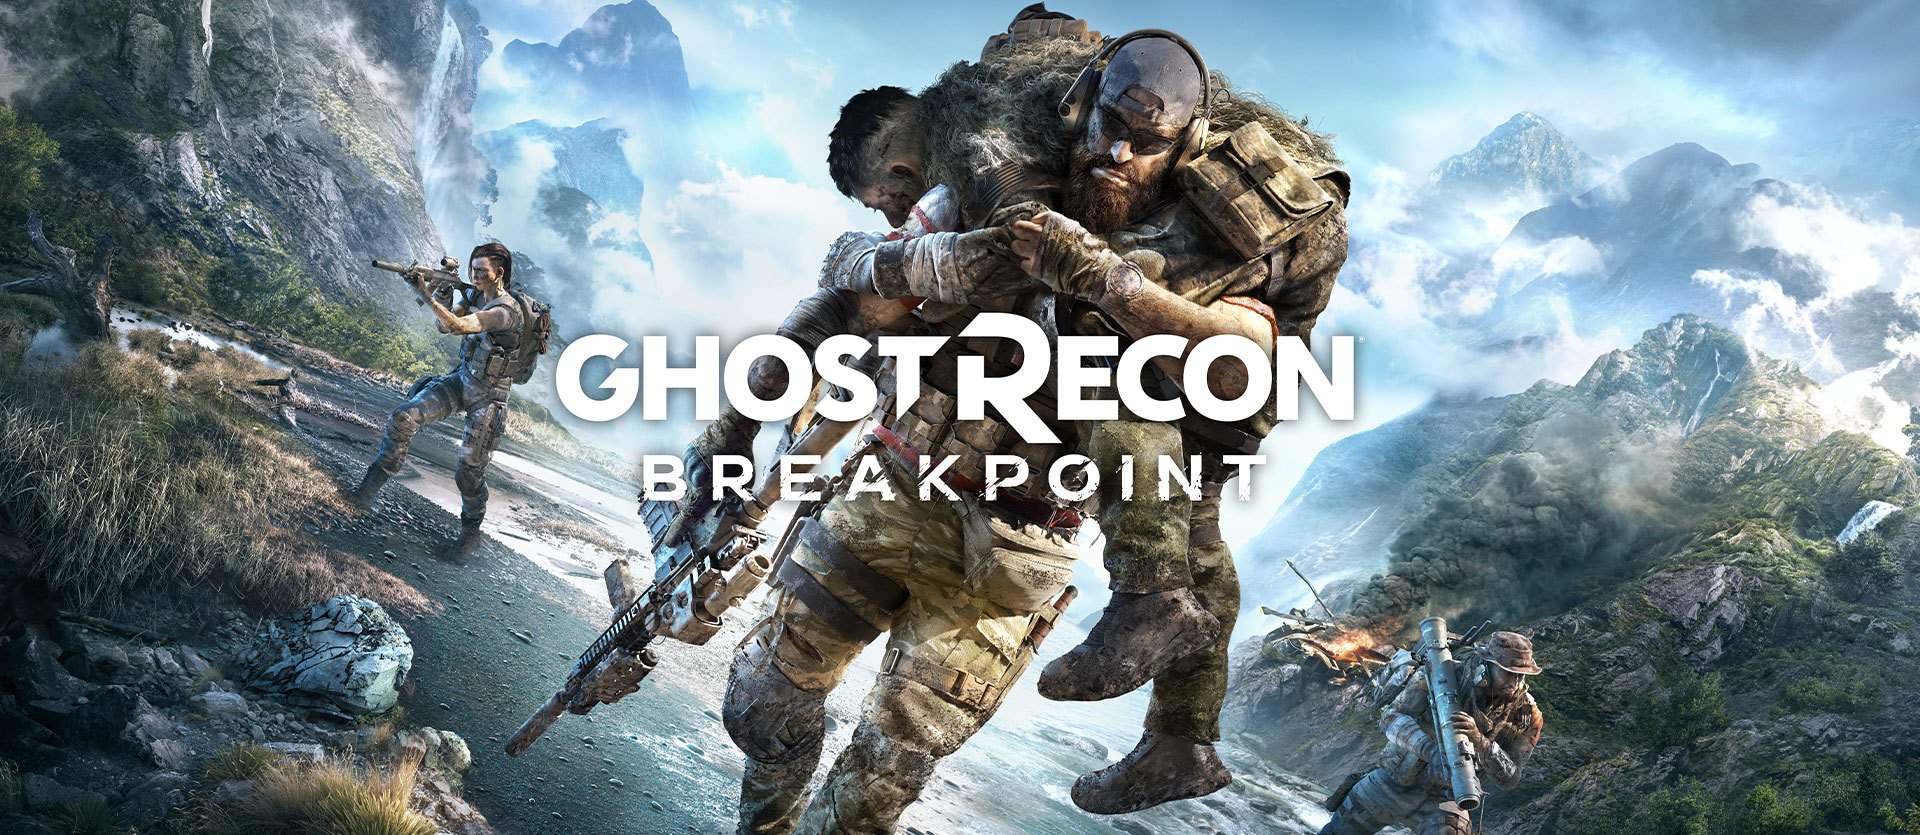 The RoundUp - Ghost Recon Breakpoint